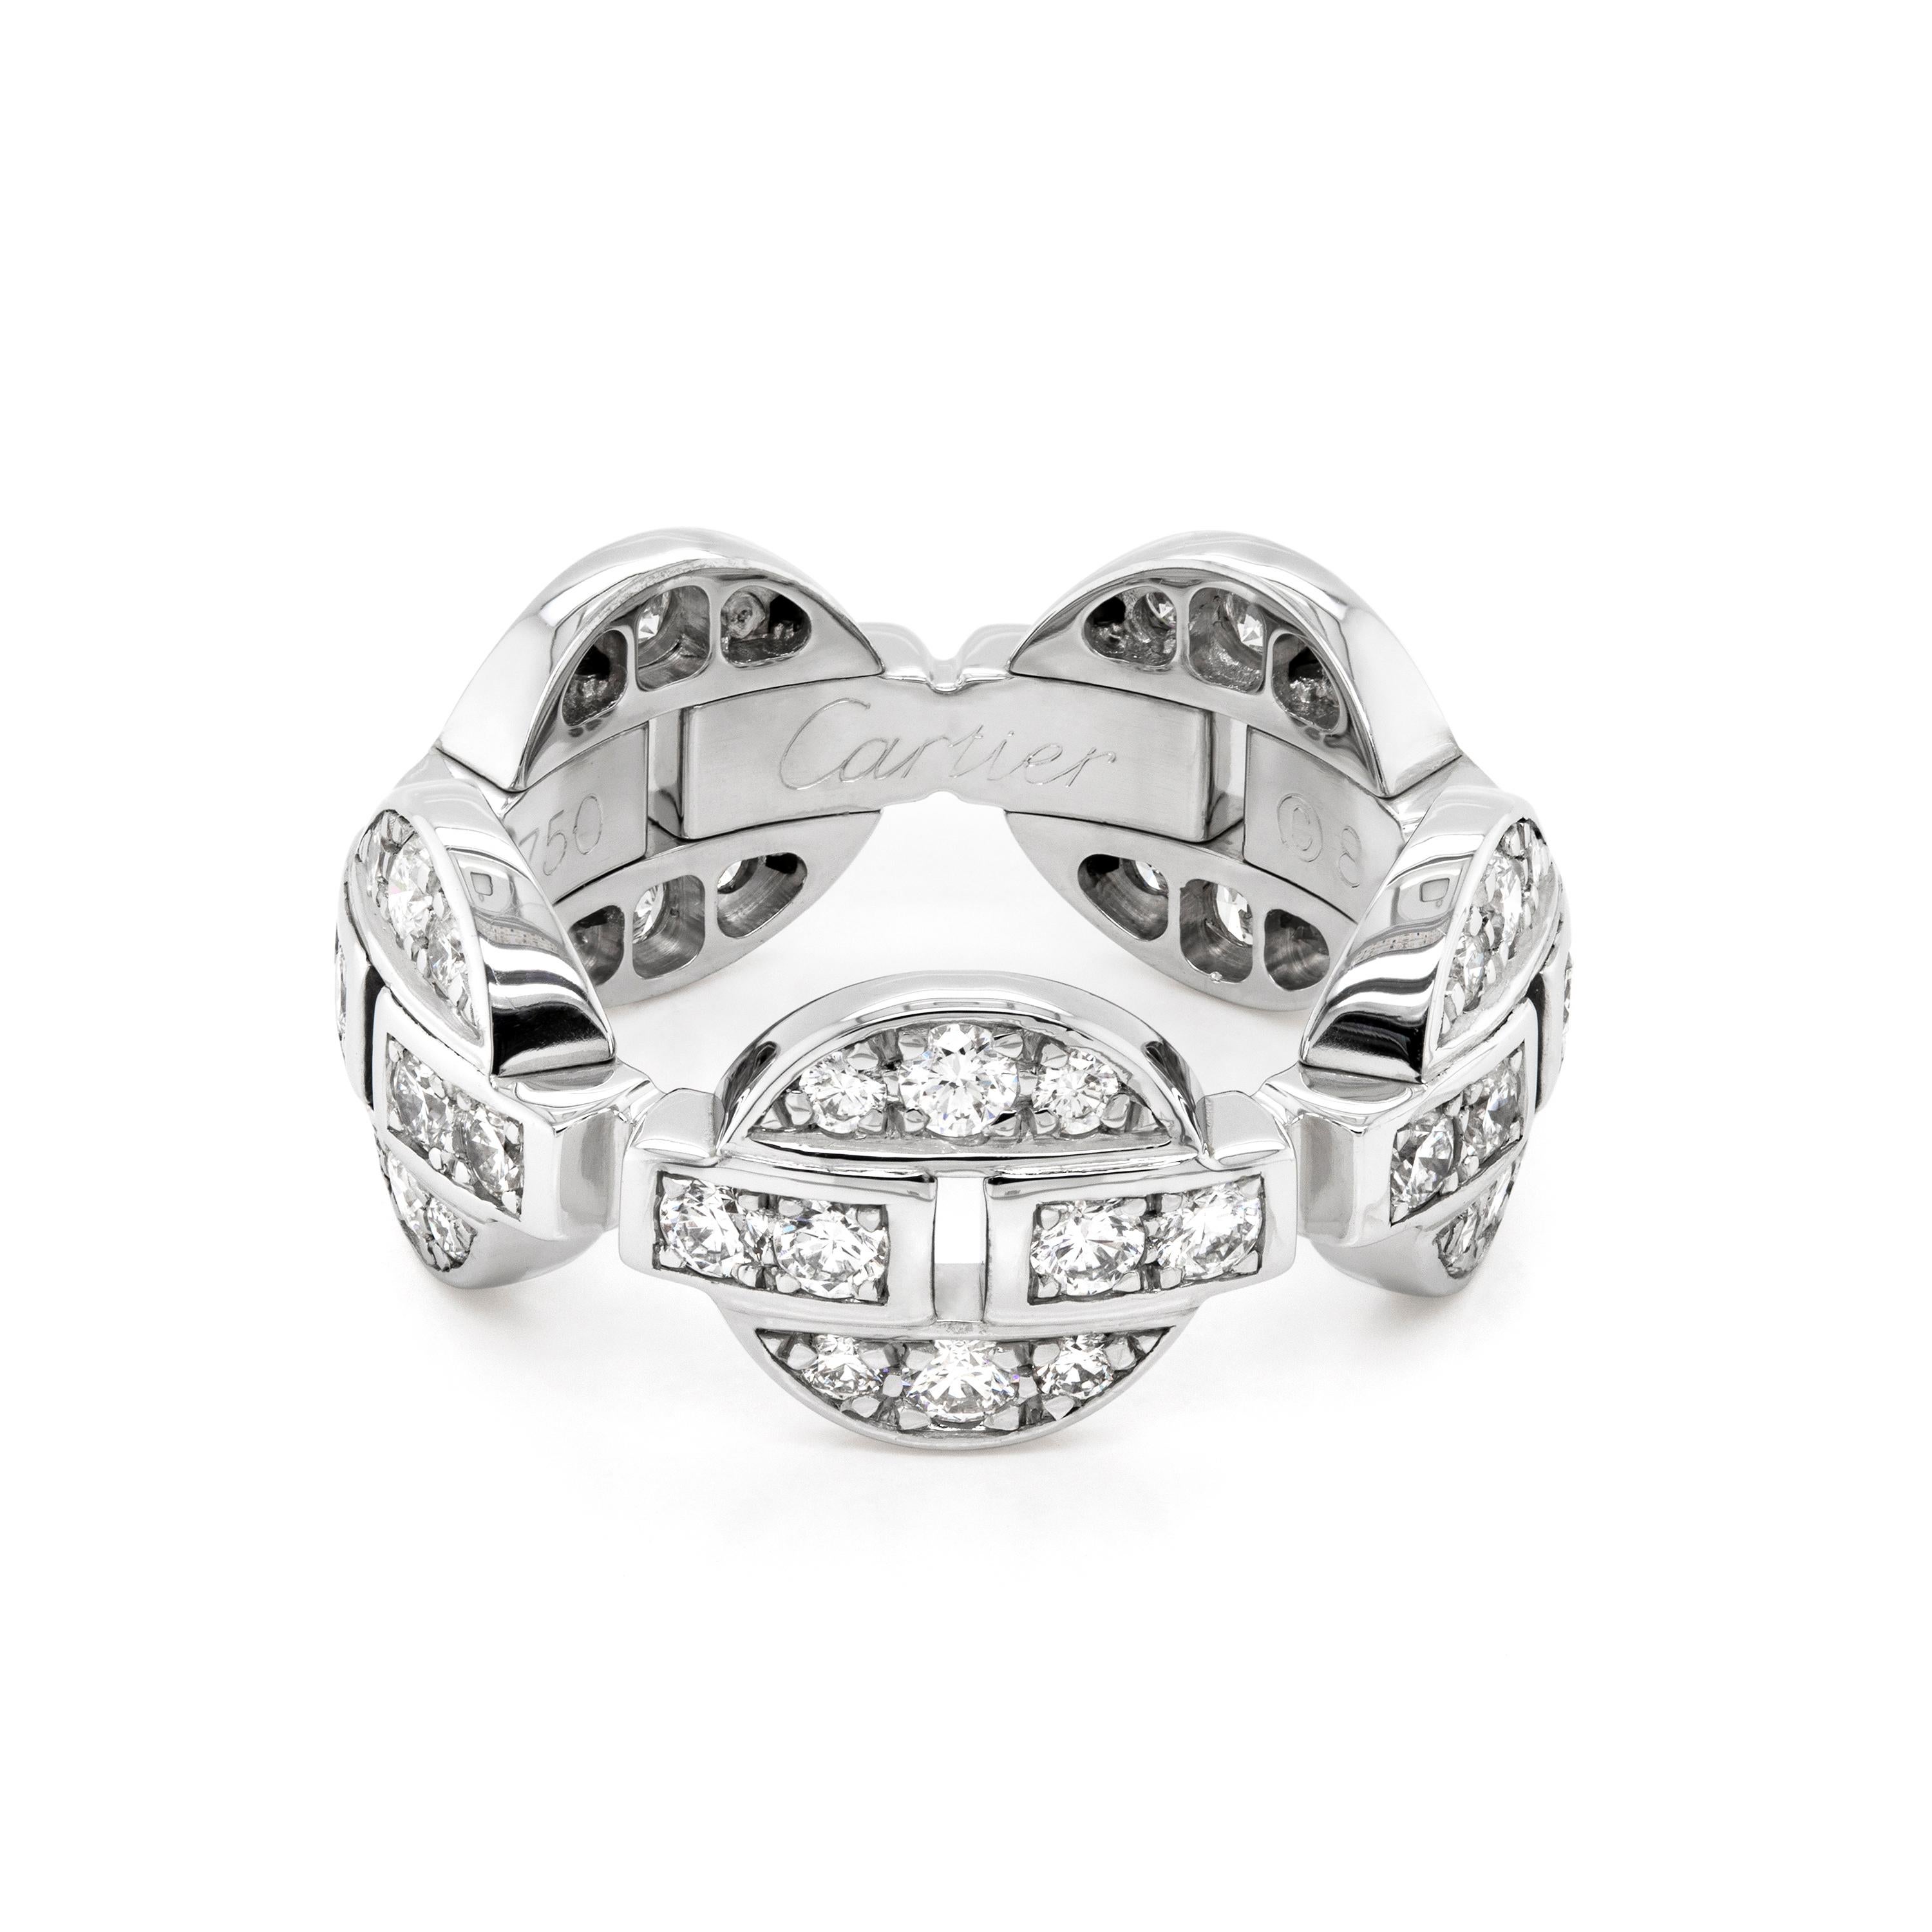 This beautiful ring is from Cartier's Himalia collection. The ring is crafted in 18 carat white gold, featuring five circular motifs all perfectly inlaid with fine quality diamonds, linked together to create this unique piece of jewellery, The ring